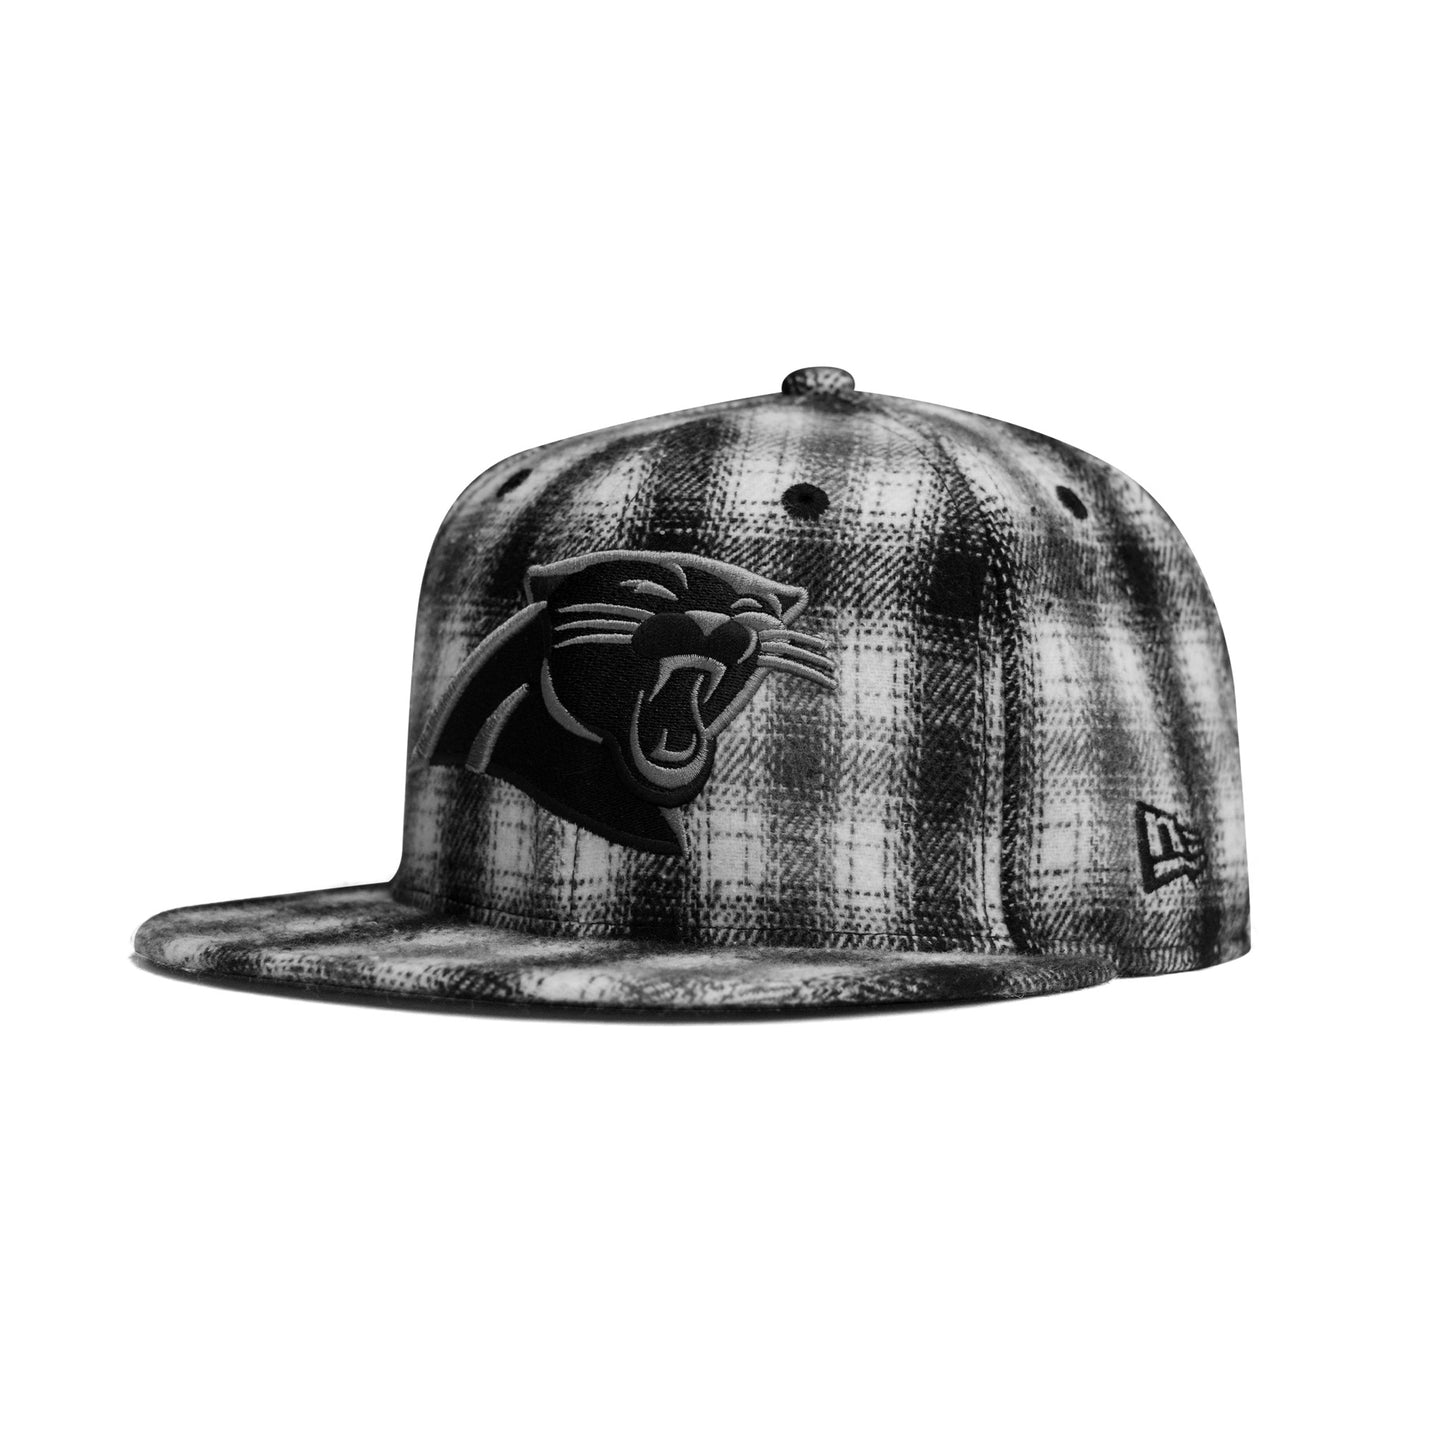 Limited Edition New Era x Carolina Panthers 5950 Fitted Hat - Black/Storm Gray/Multi